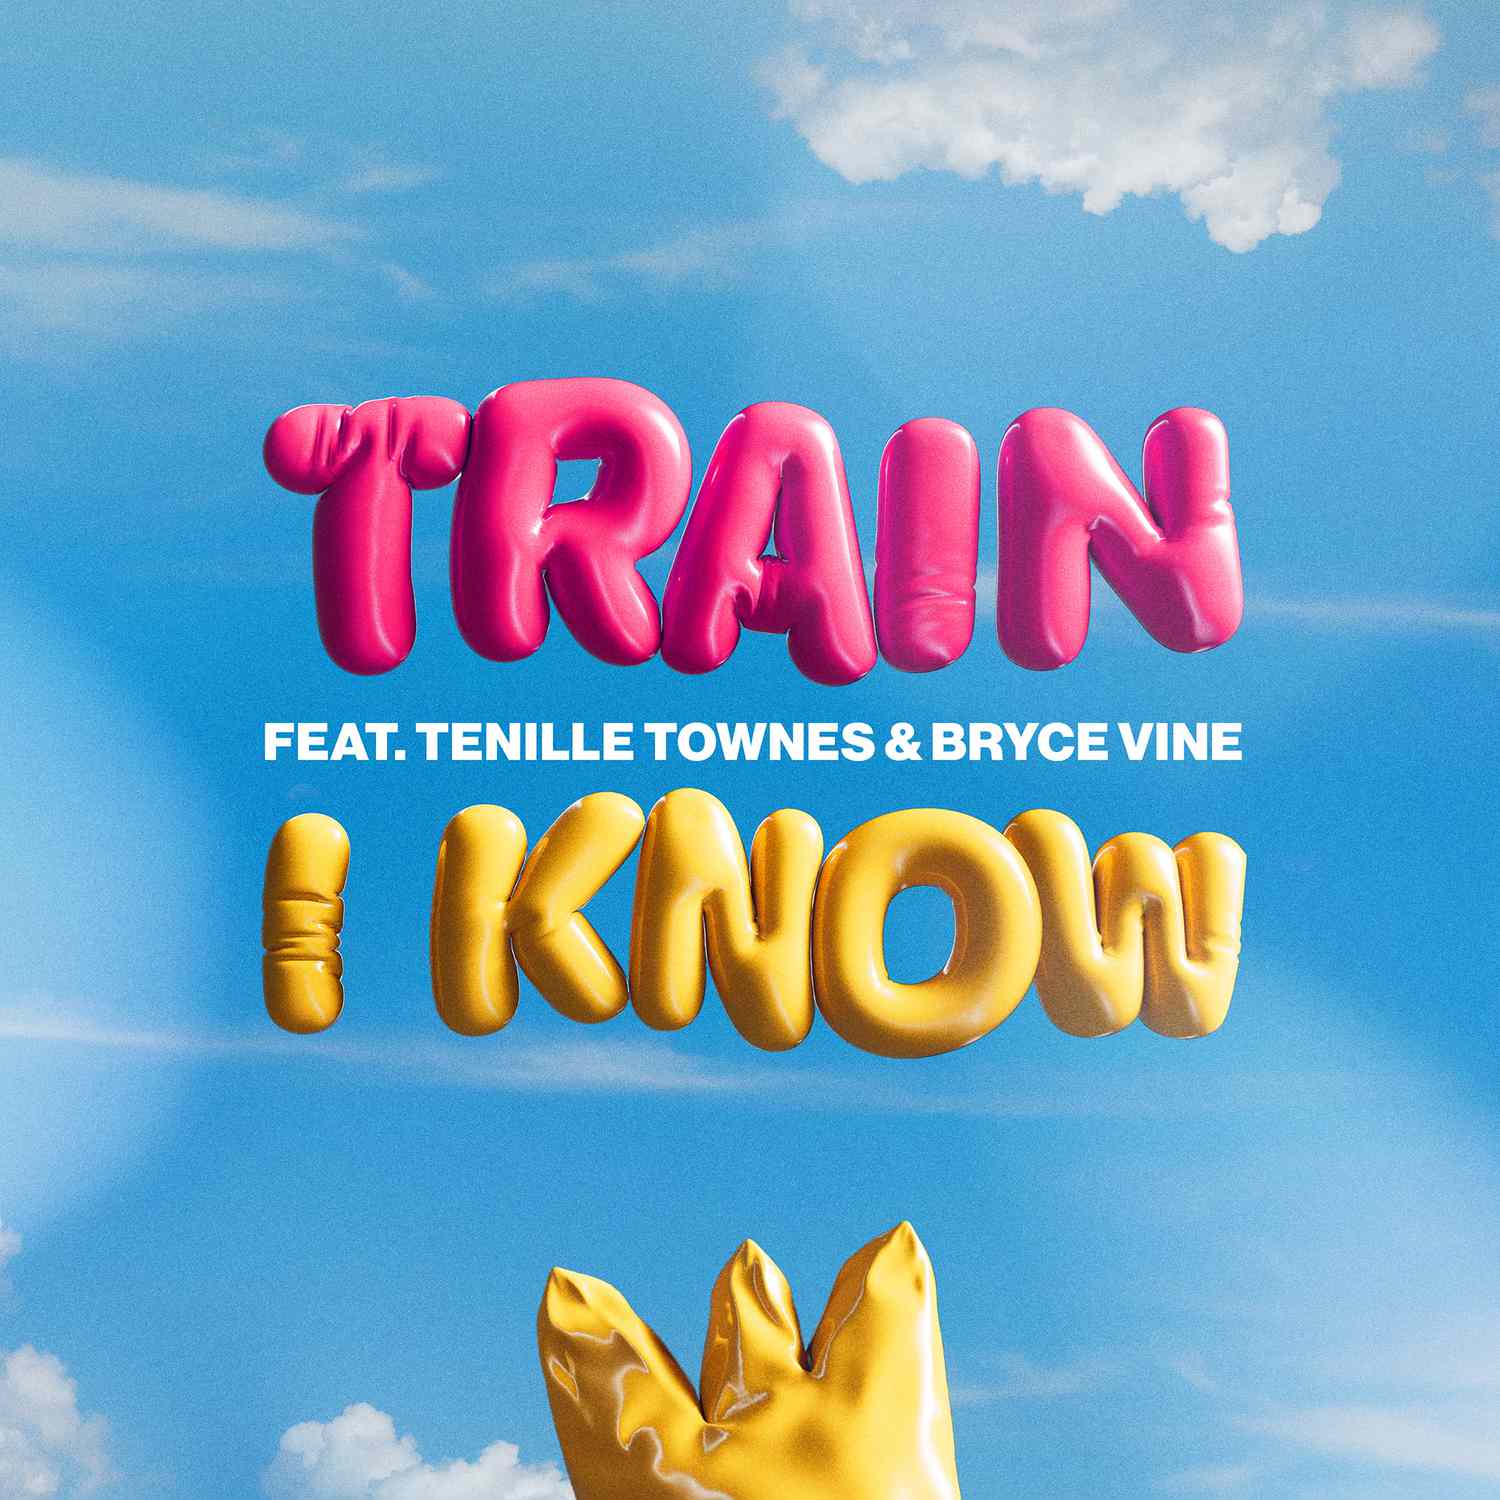 Train featuring Tenille Townes & Bryce Vine — I Know cover artwork